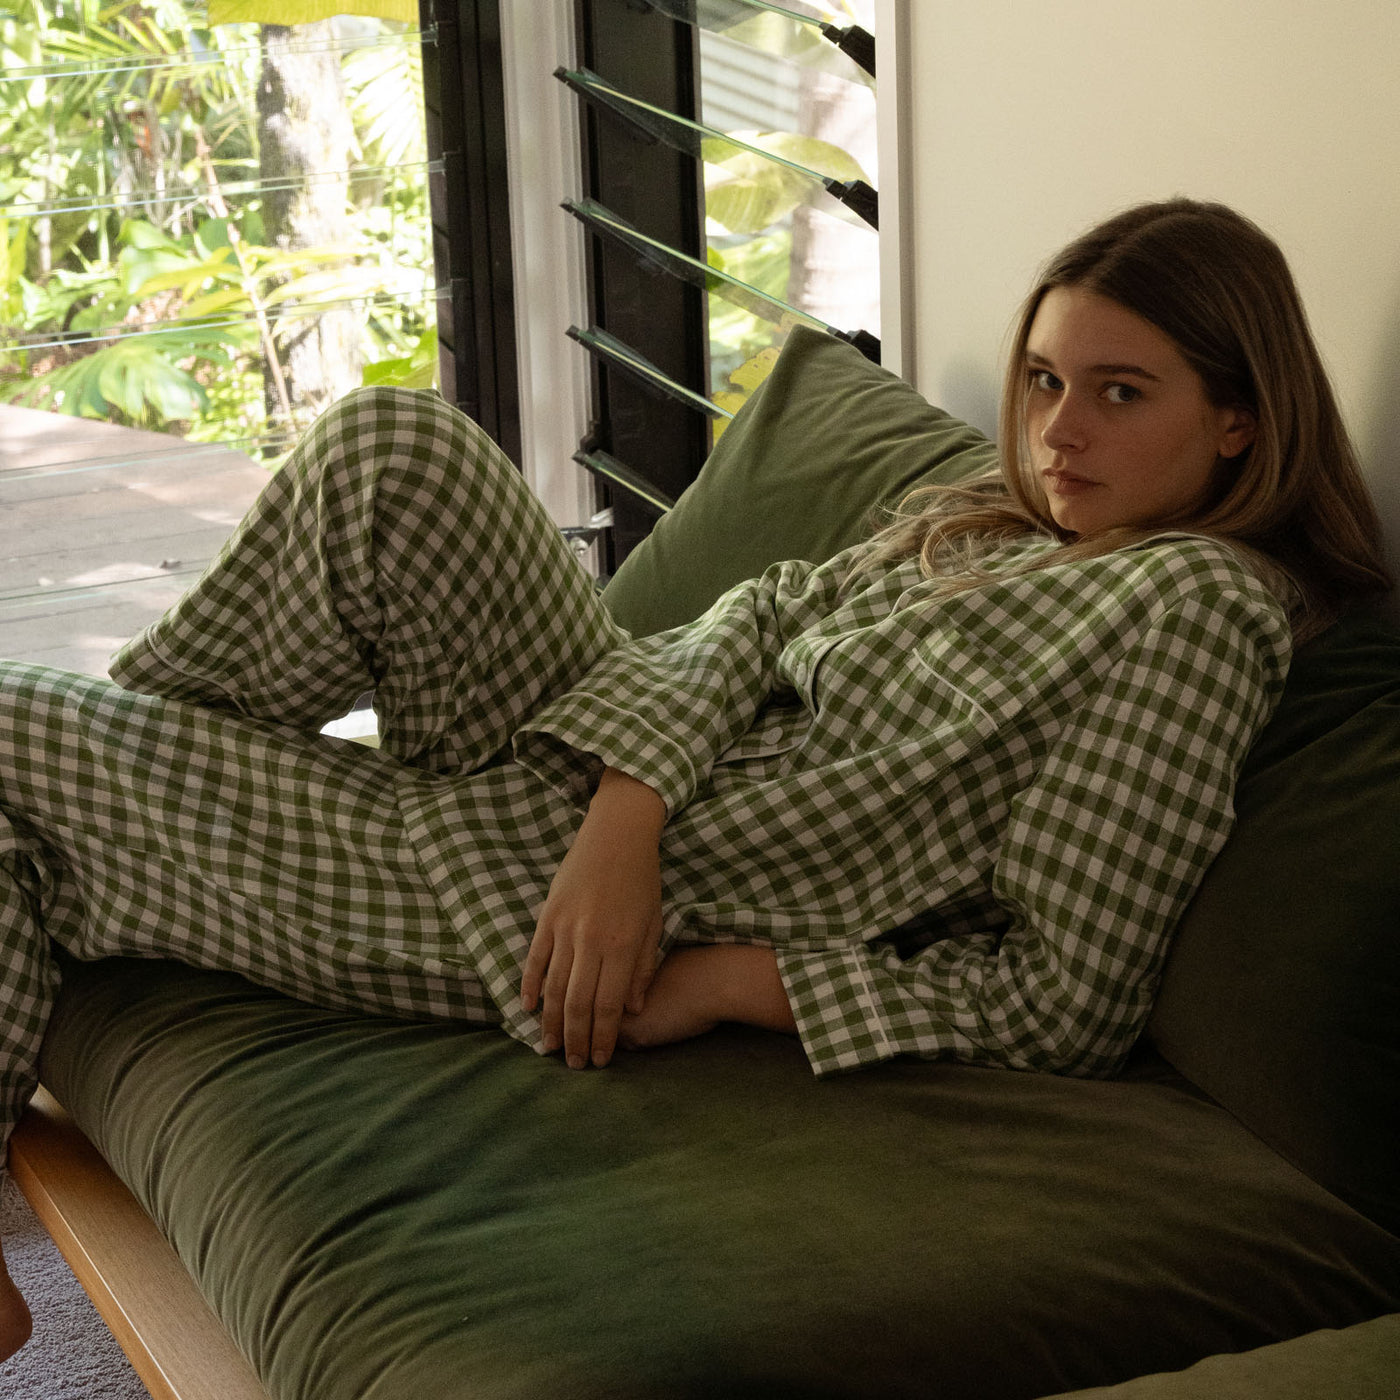 French Flax Linen Pyjama Set in Ivy Gingham